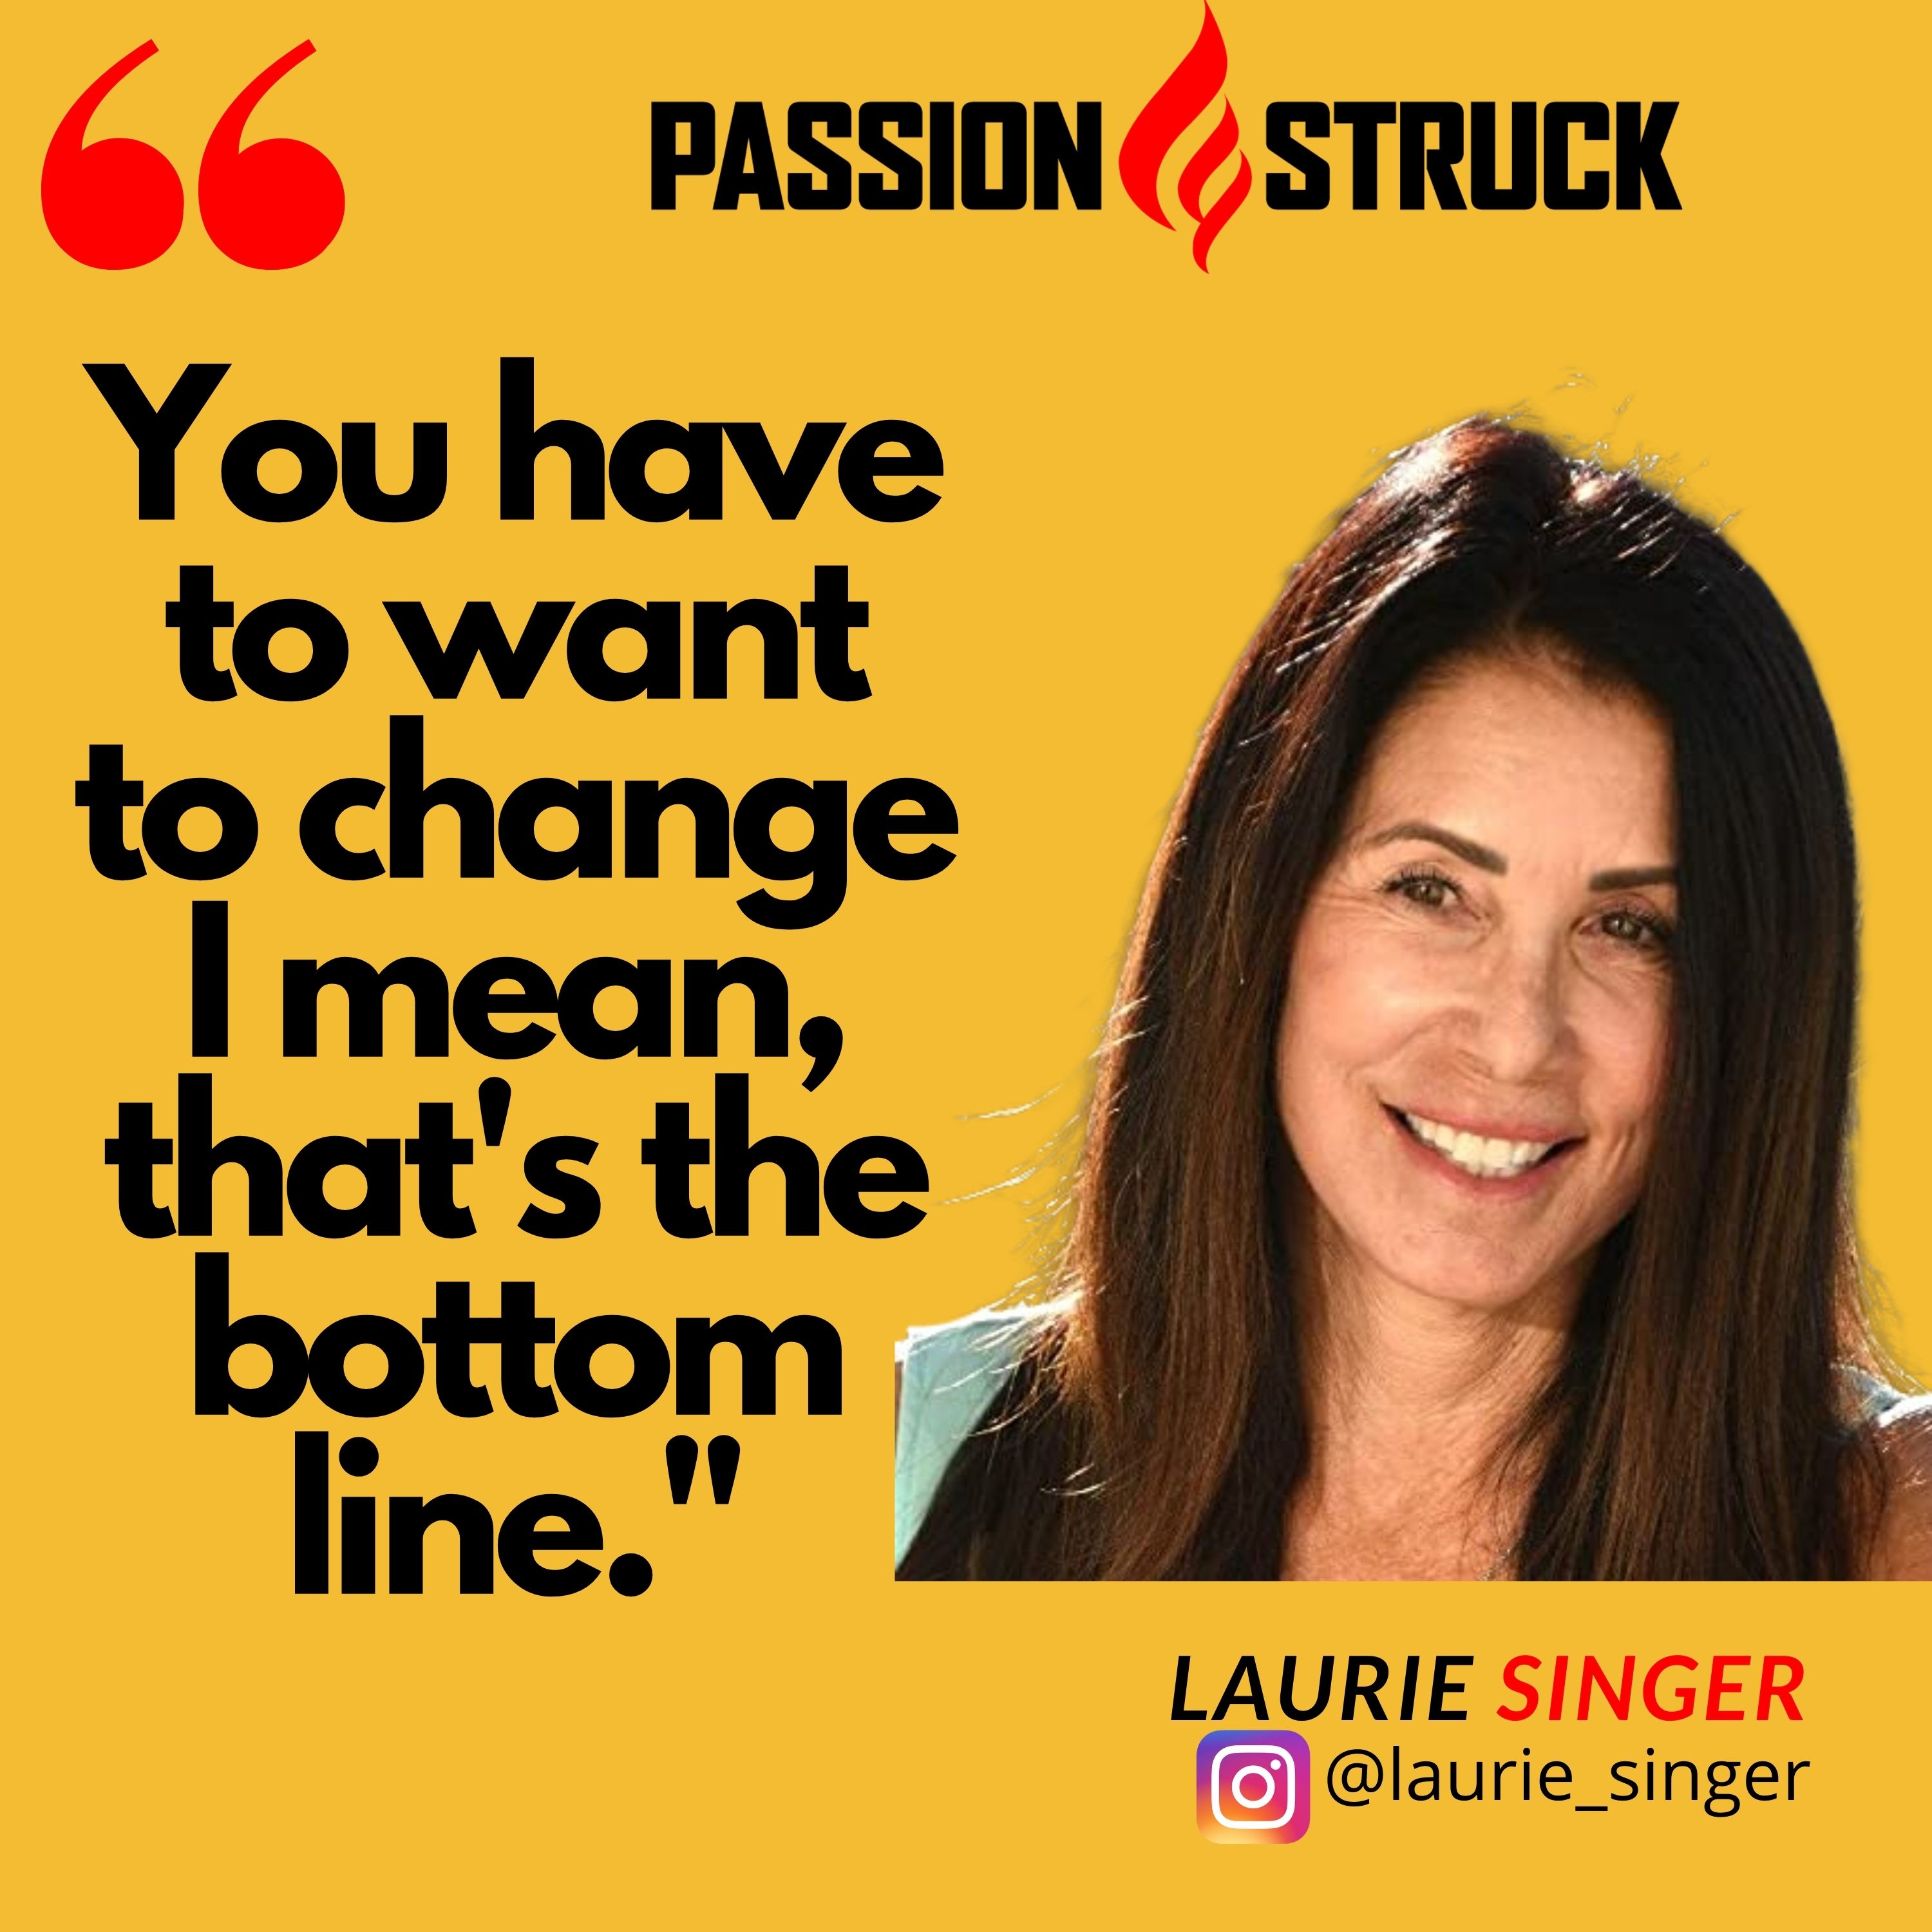 Laurie Singer Quote about wanting to change from passion struck podcast